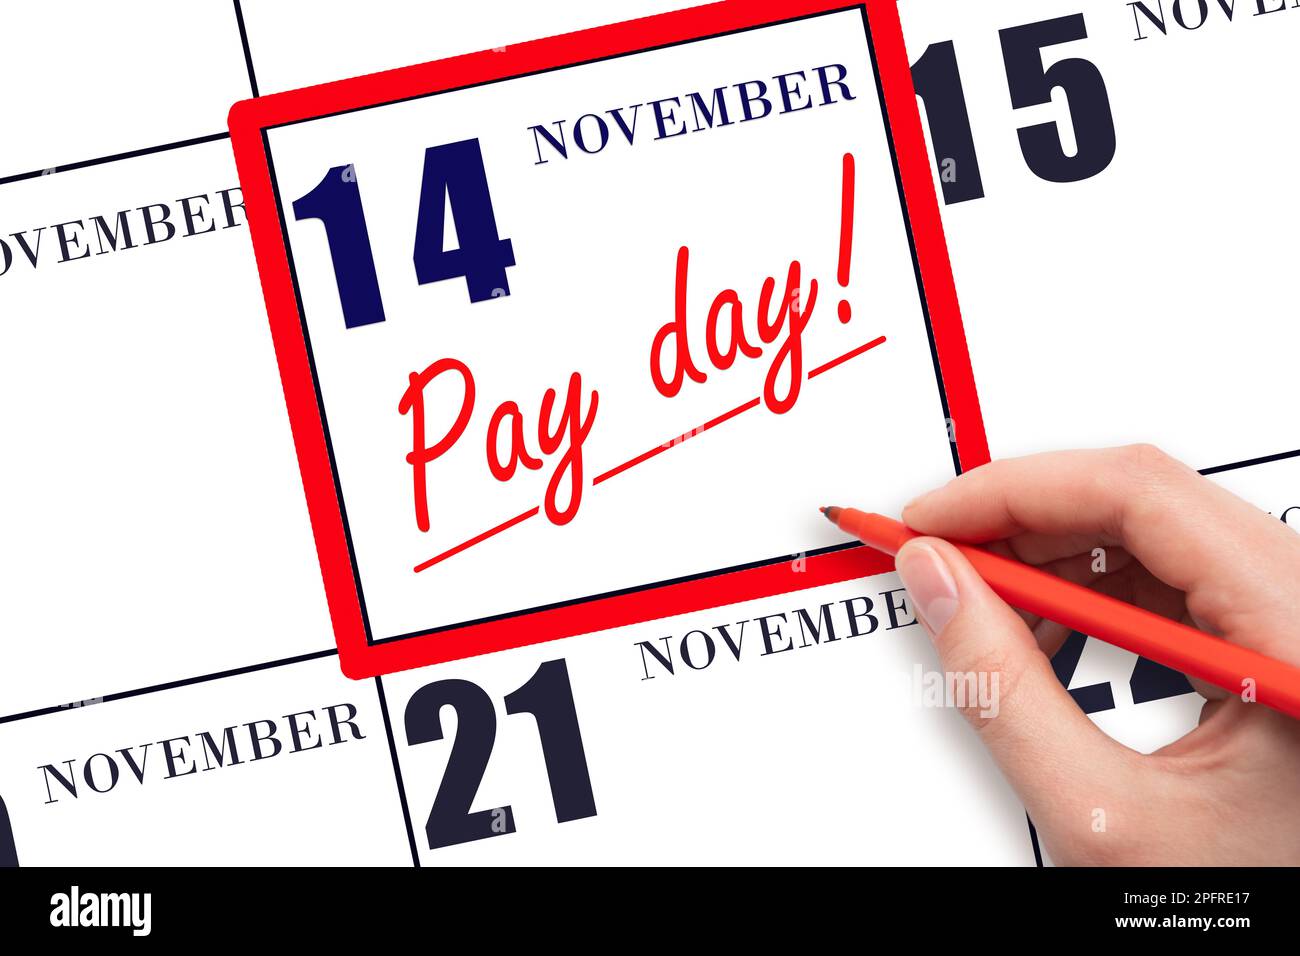 14th day of November. Hand writing text PAY DATE on calendar date November 14 and underline it. Payment due date.  Reminder concept of payment. Autumn Stock Photo